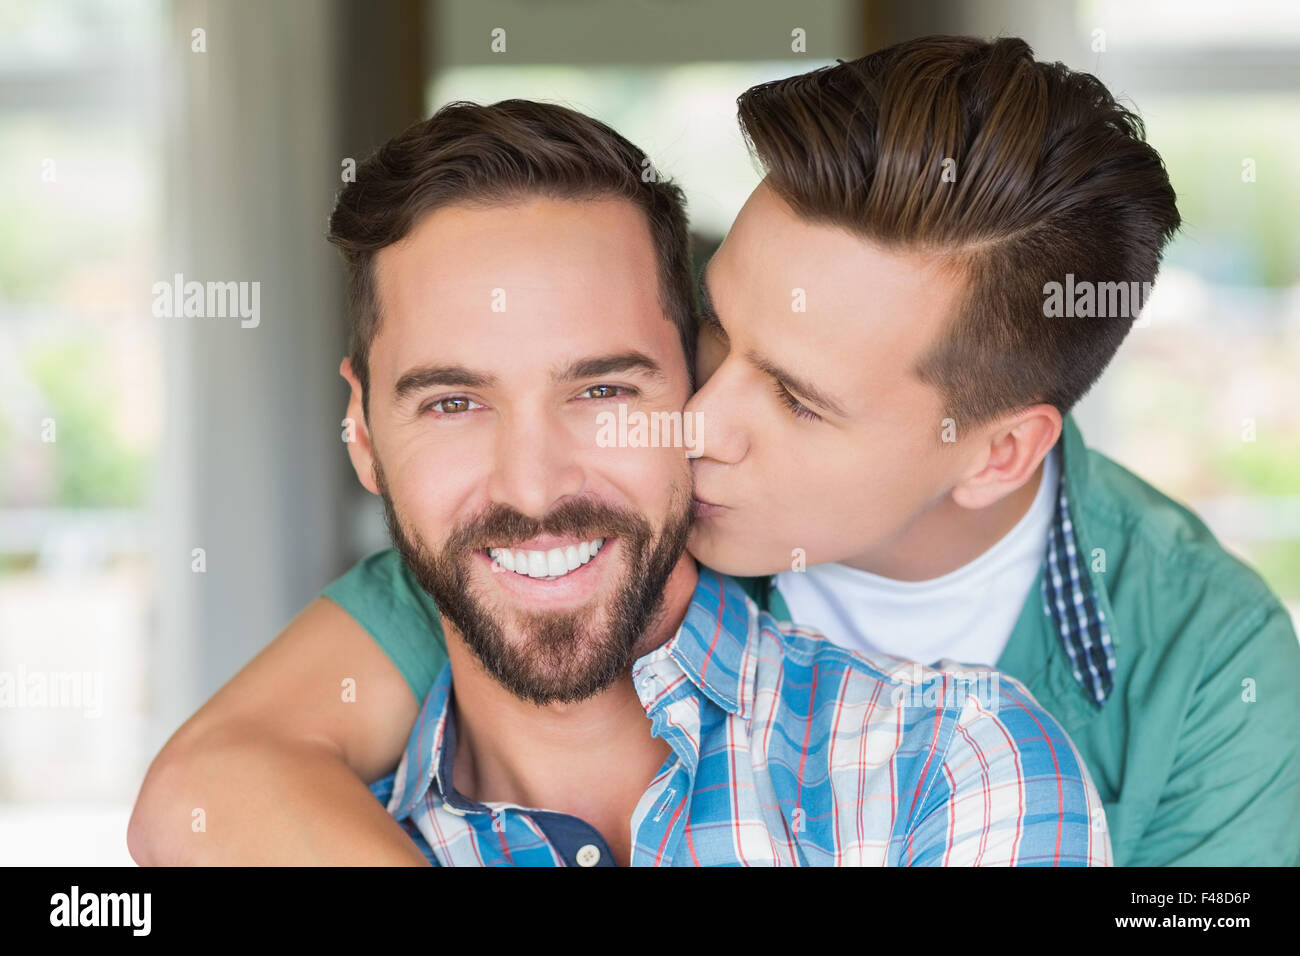 Homosexual couple men kissing each other Stock Photo